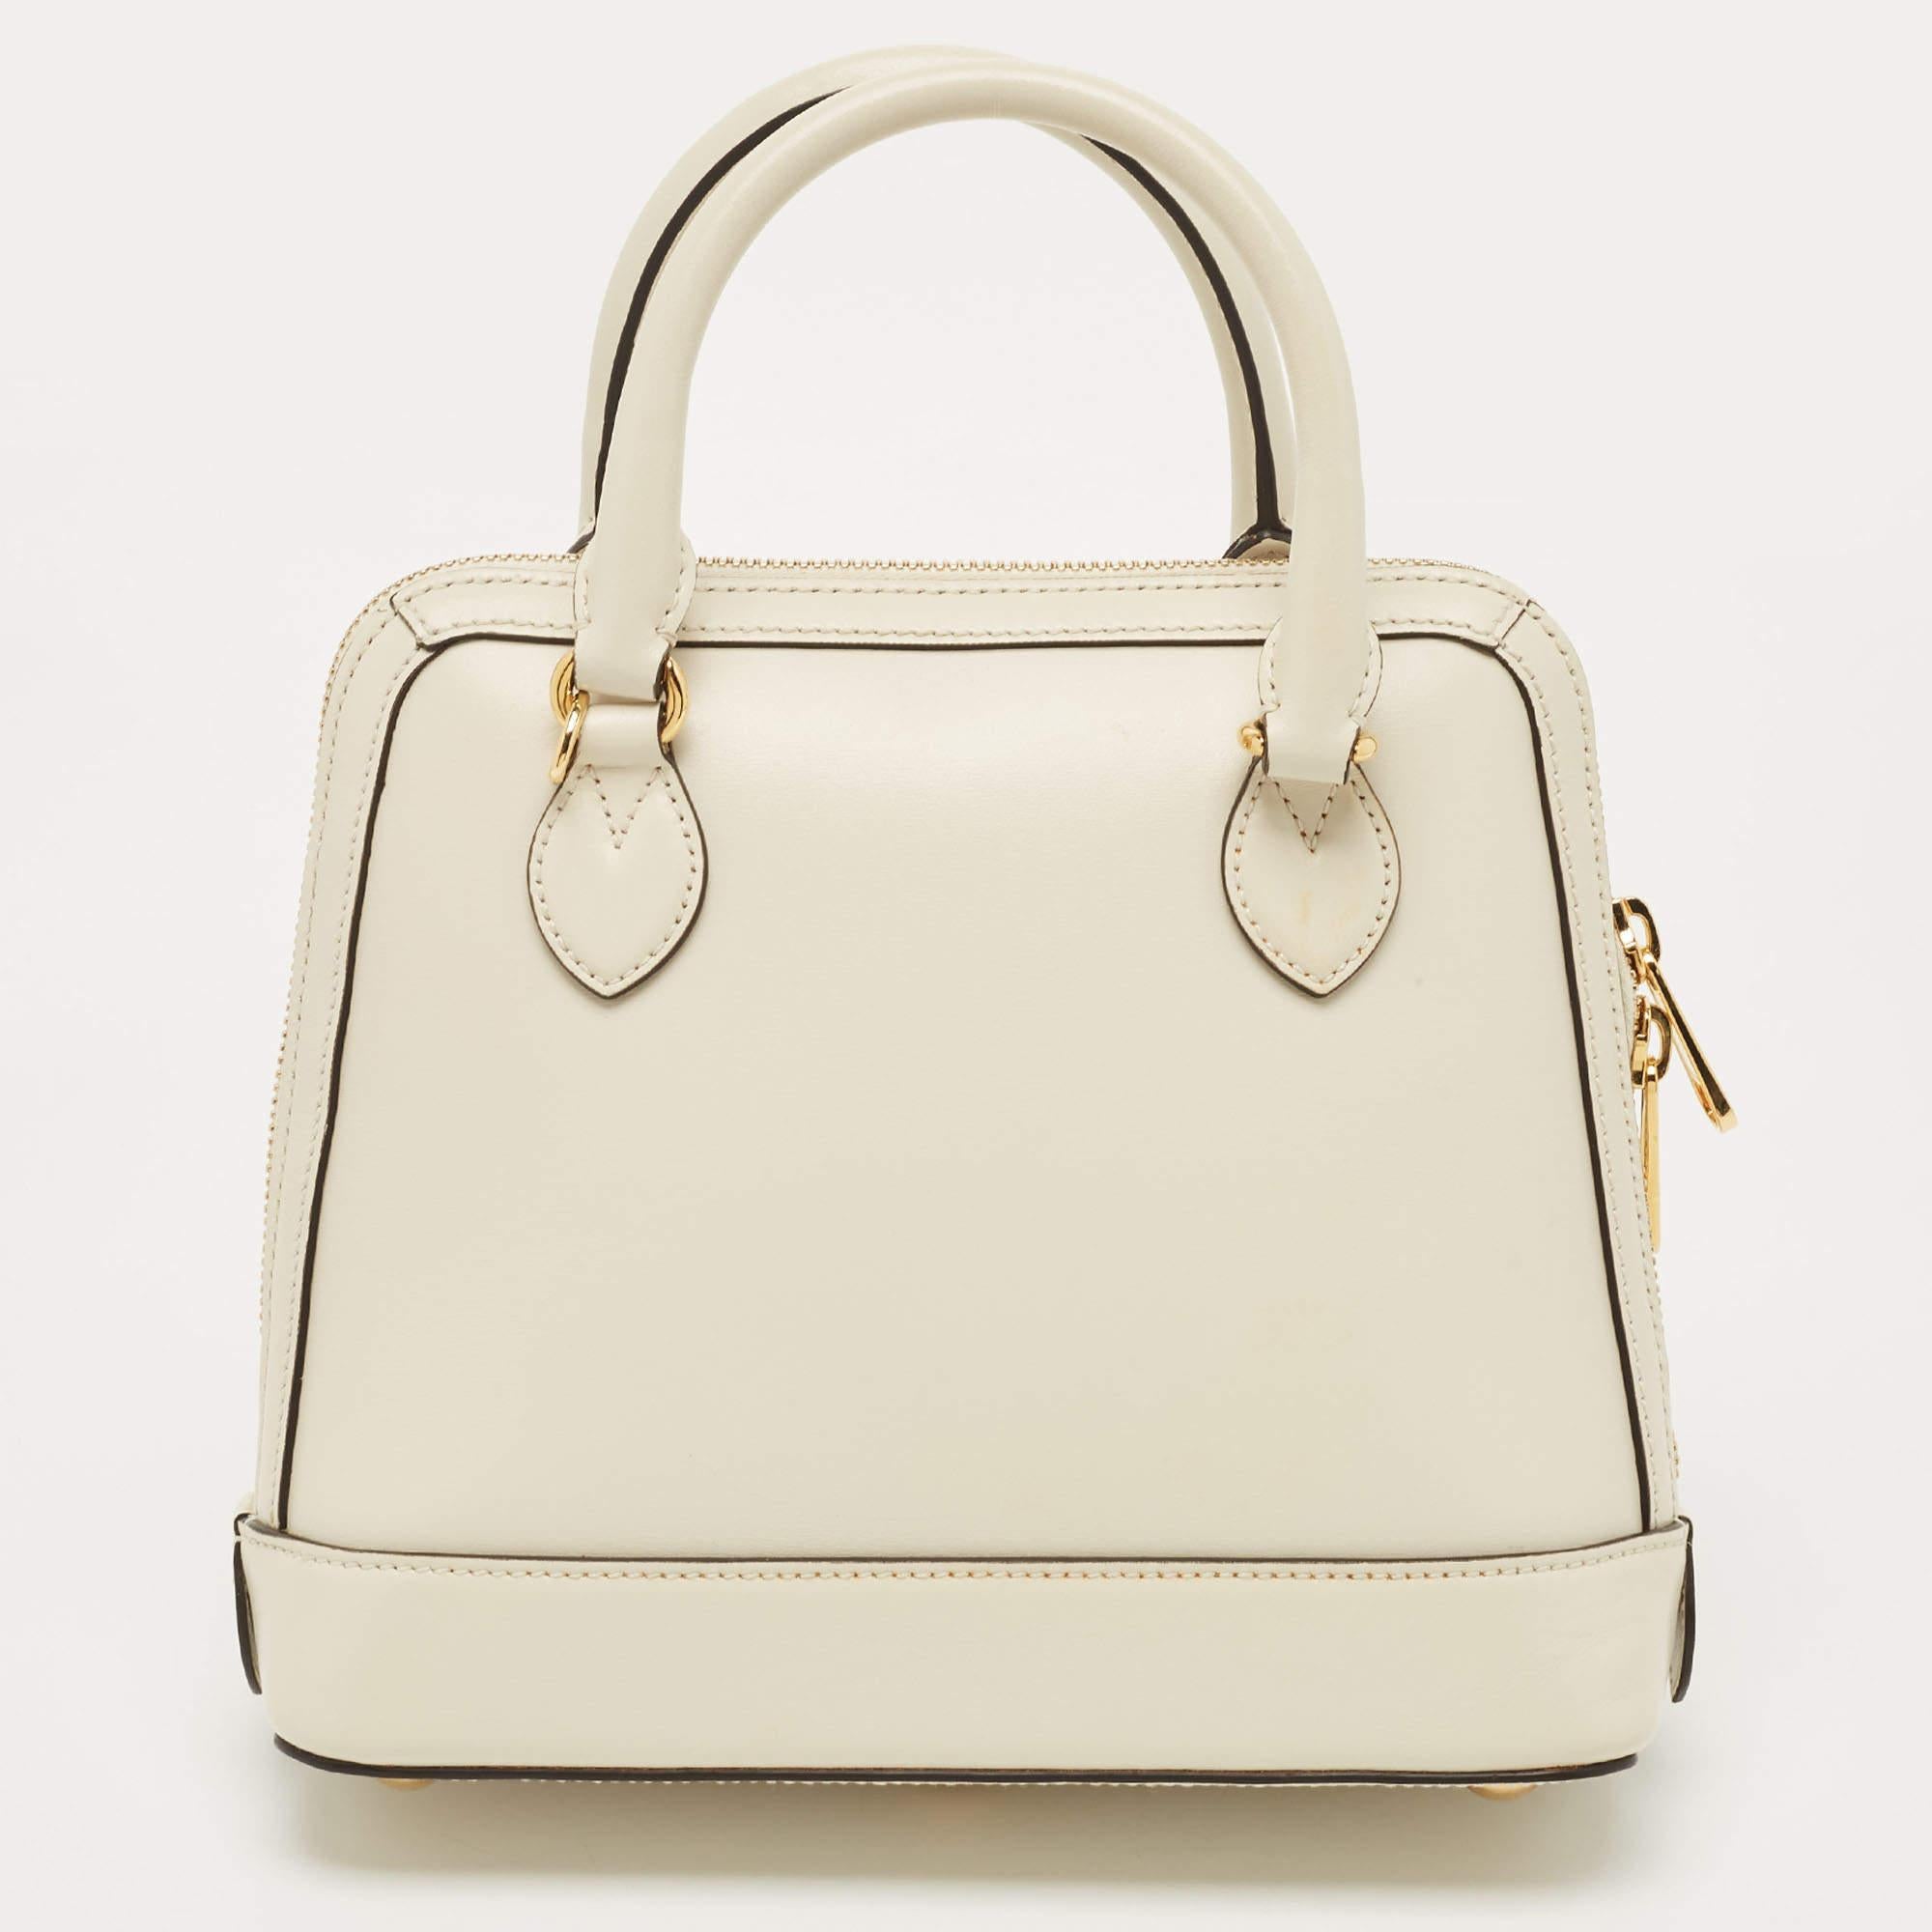 Handbags are more than just instruments to carry one's essentials. They essay one's sense of style, and the better the bag, the more confidence we get when we hold it. This Gucci Horsebit 1955 bag is meticulously made from luxe materials and has a